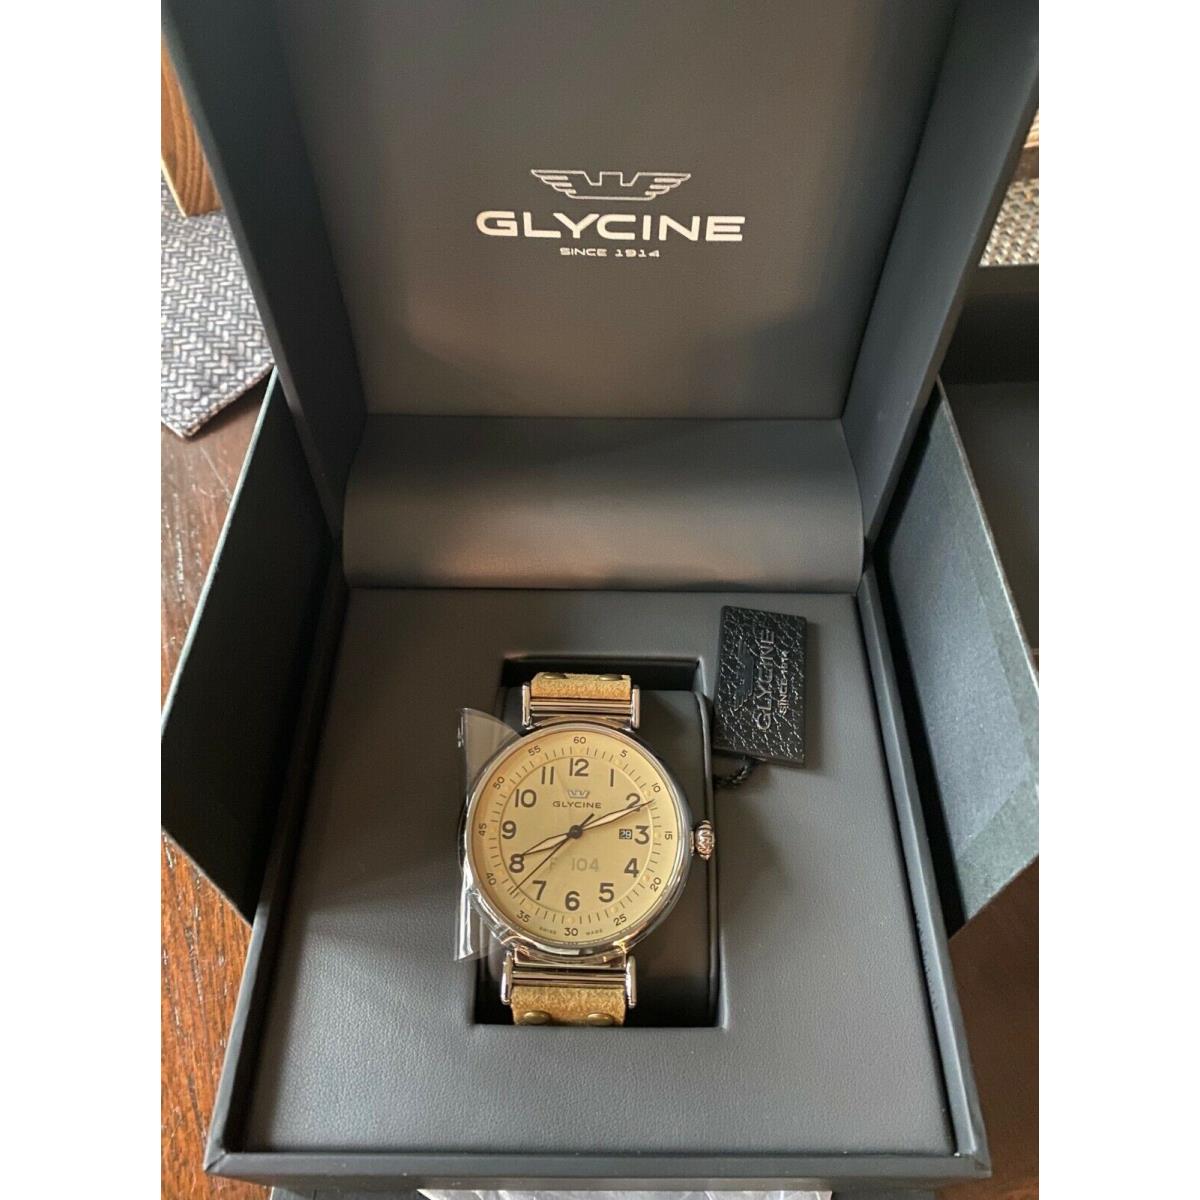 Nos Glycine F 104 Automatic Watch 48mm 3932.15AT-LB7R